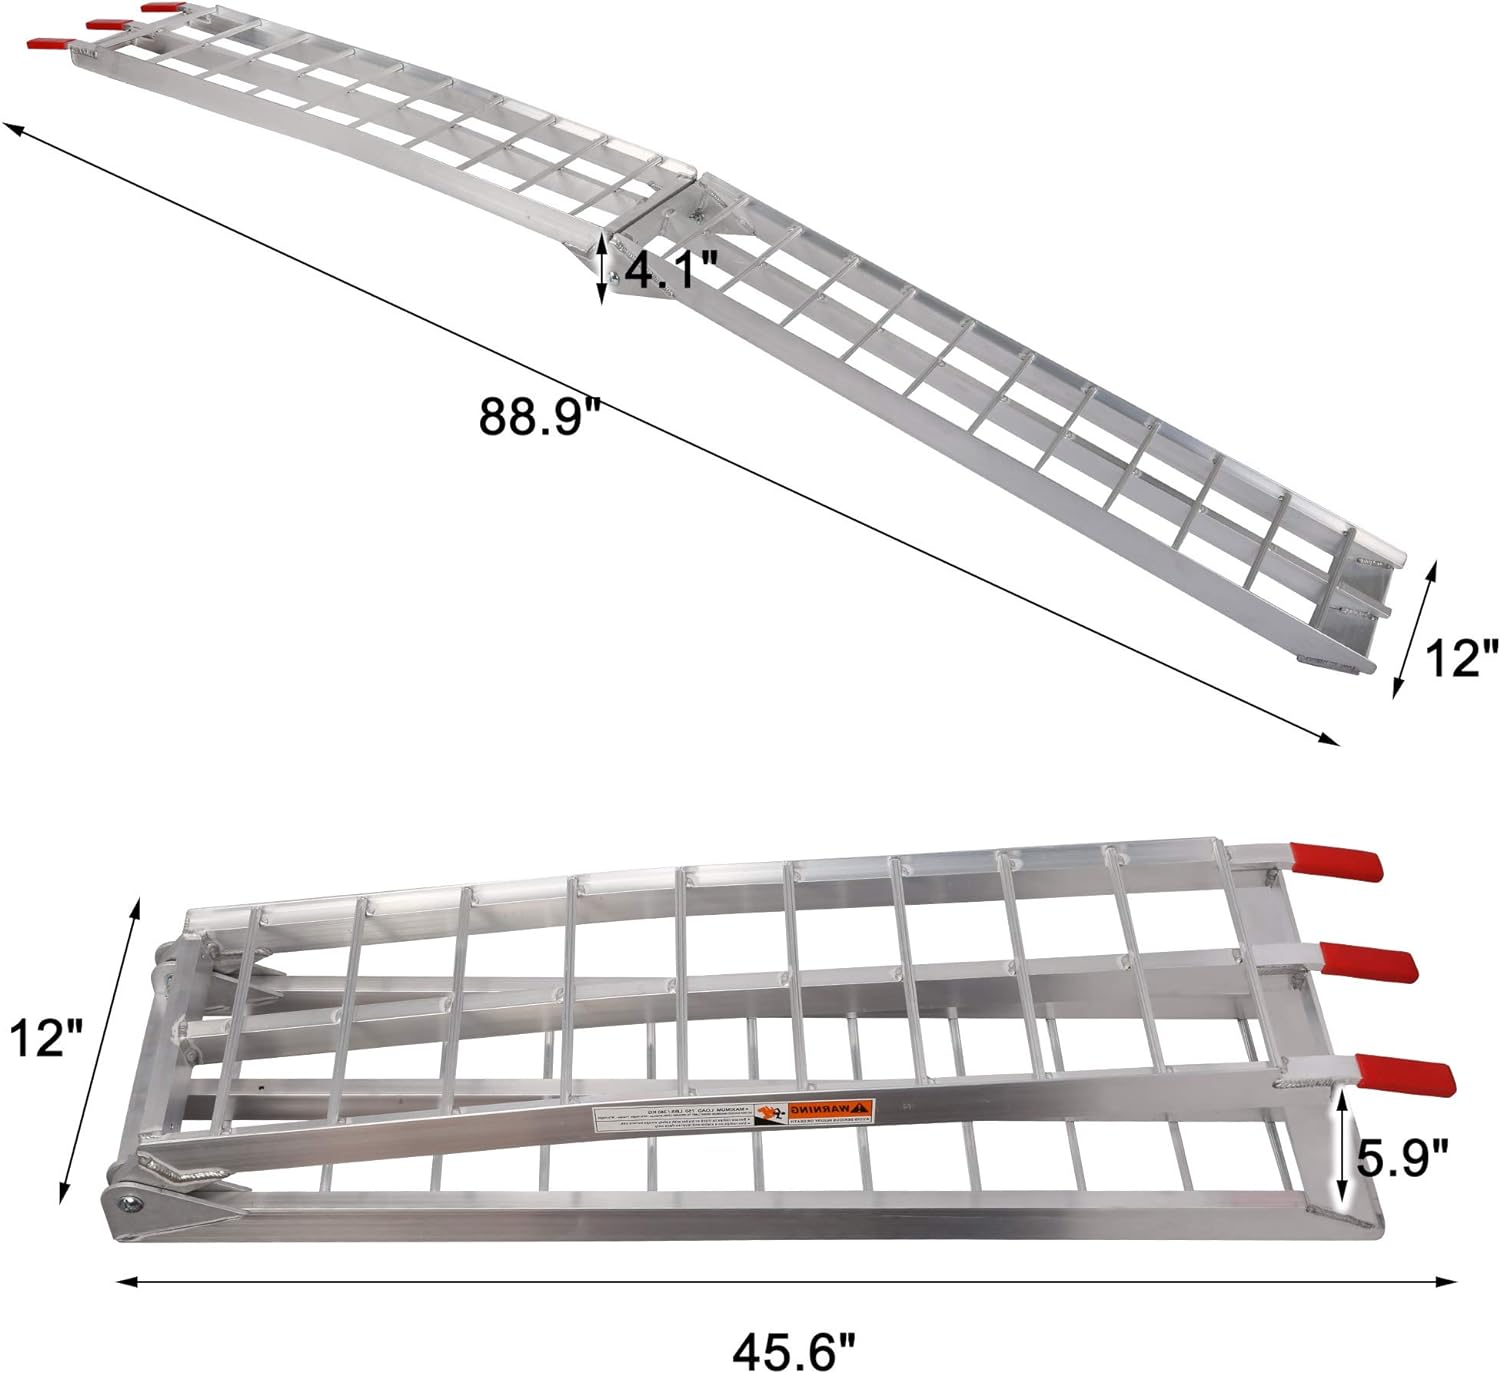 Set of 2 Folding Loading Ramp 7.4ft with 1500lbs Capacity Aluminum Truck Ramp, Gridded